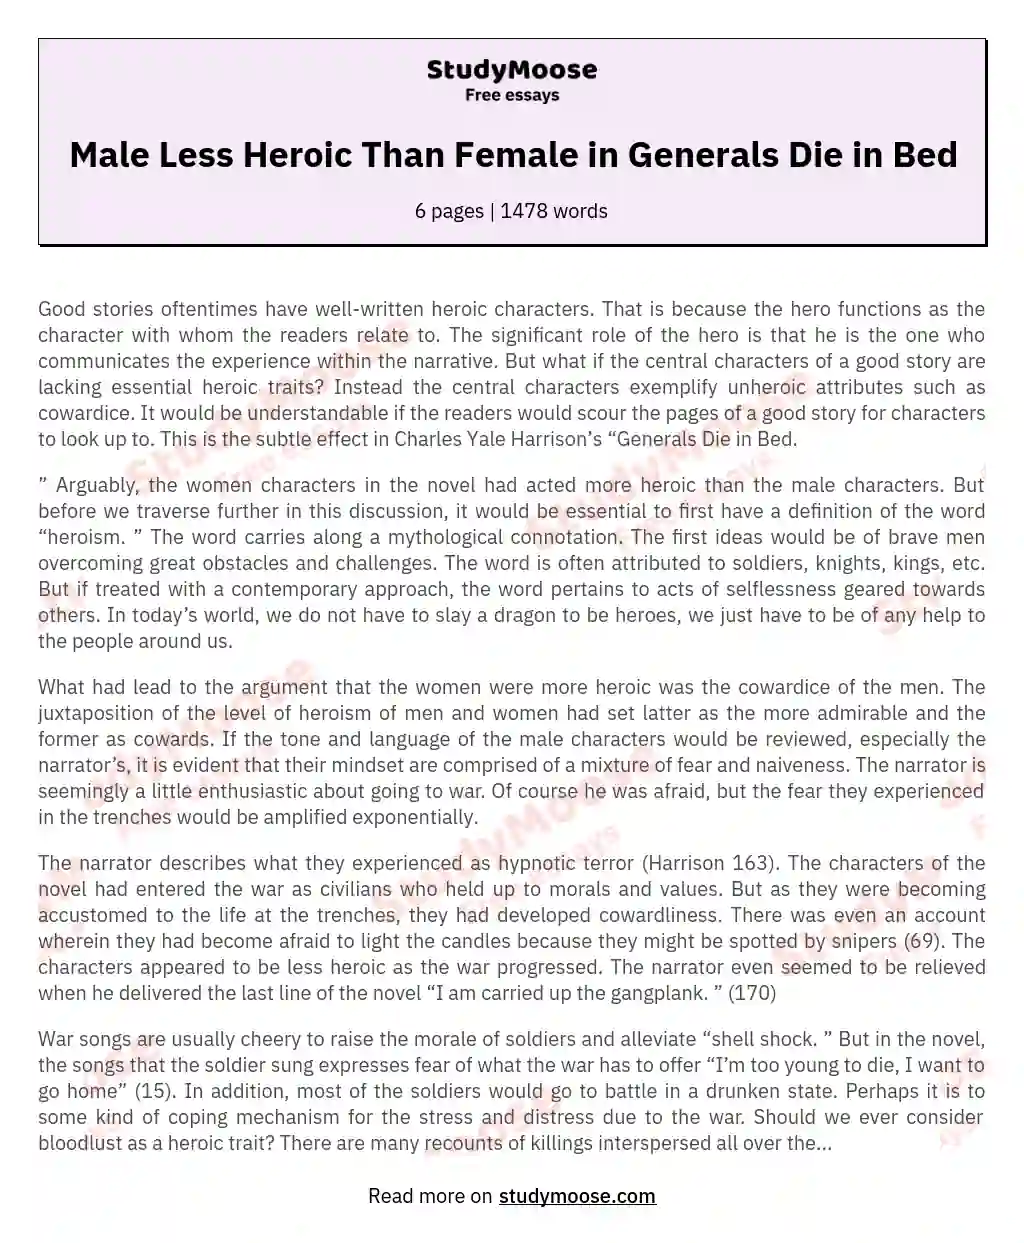 Male Characters as Less Heroic than the Female Characters of “Generals Die in Bed”